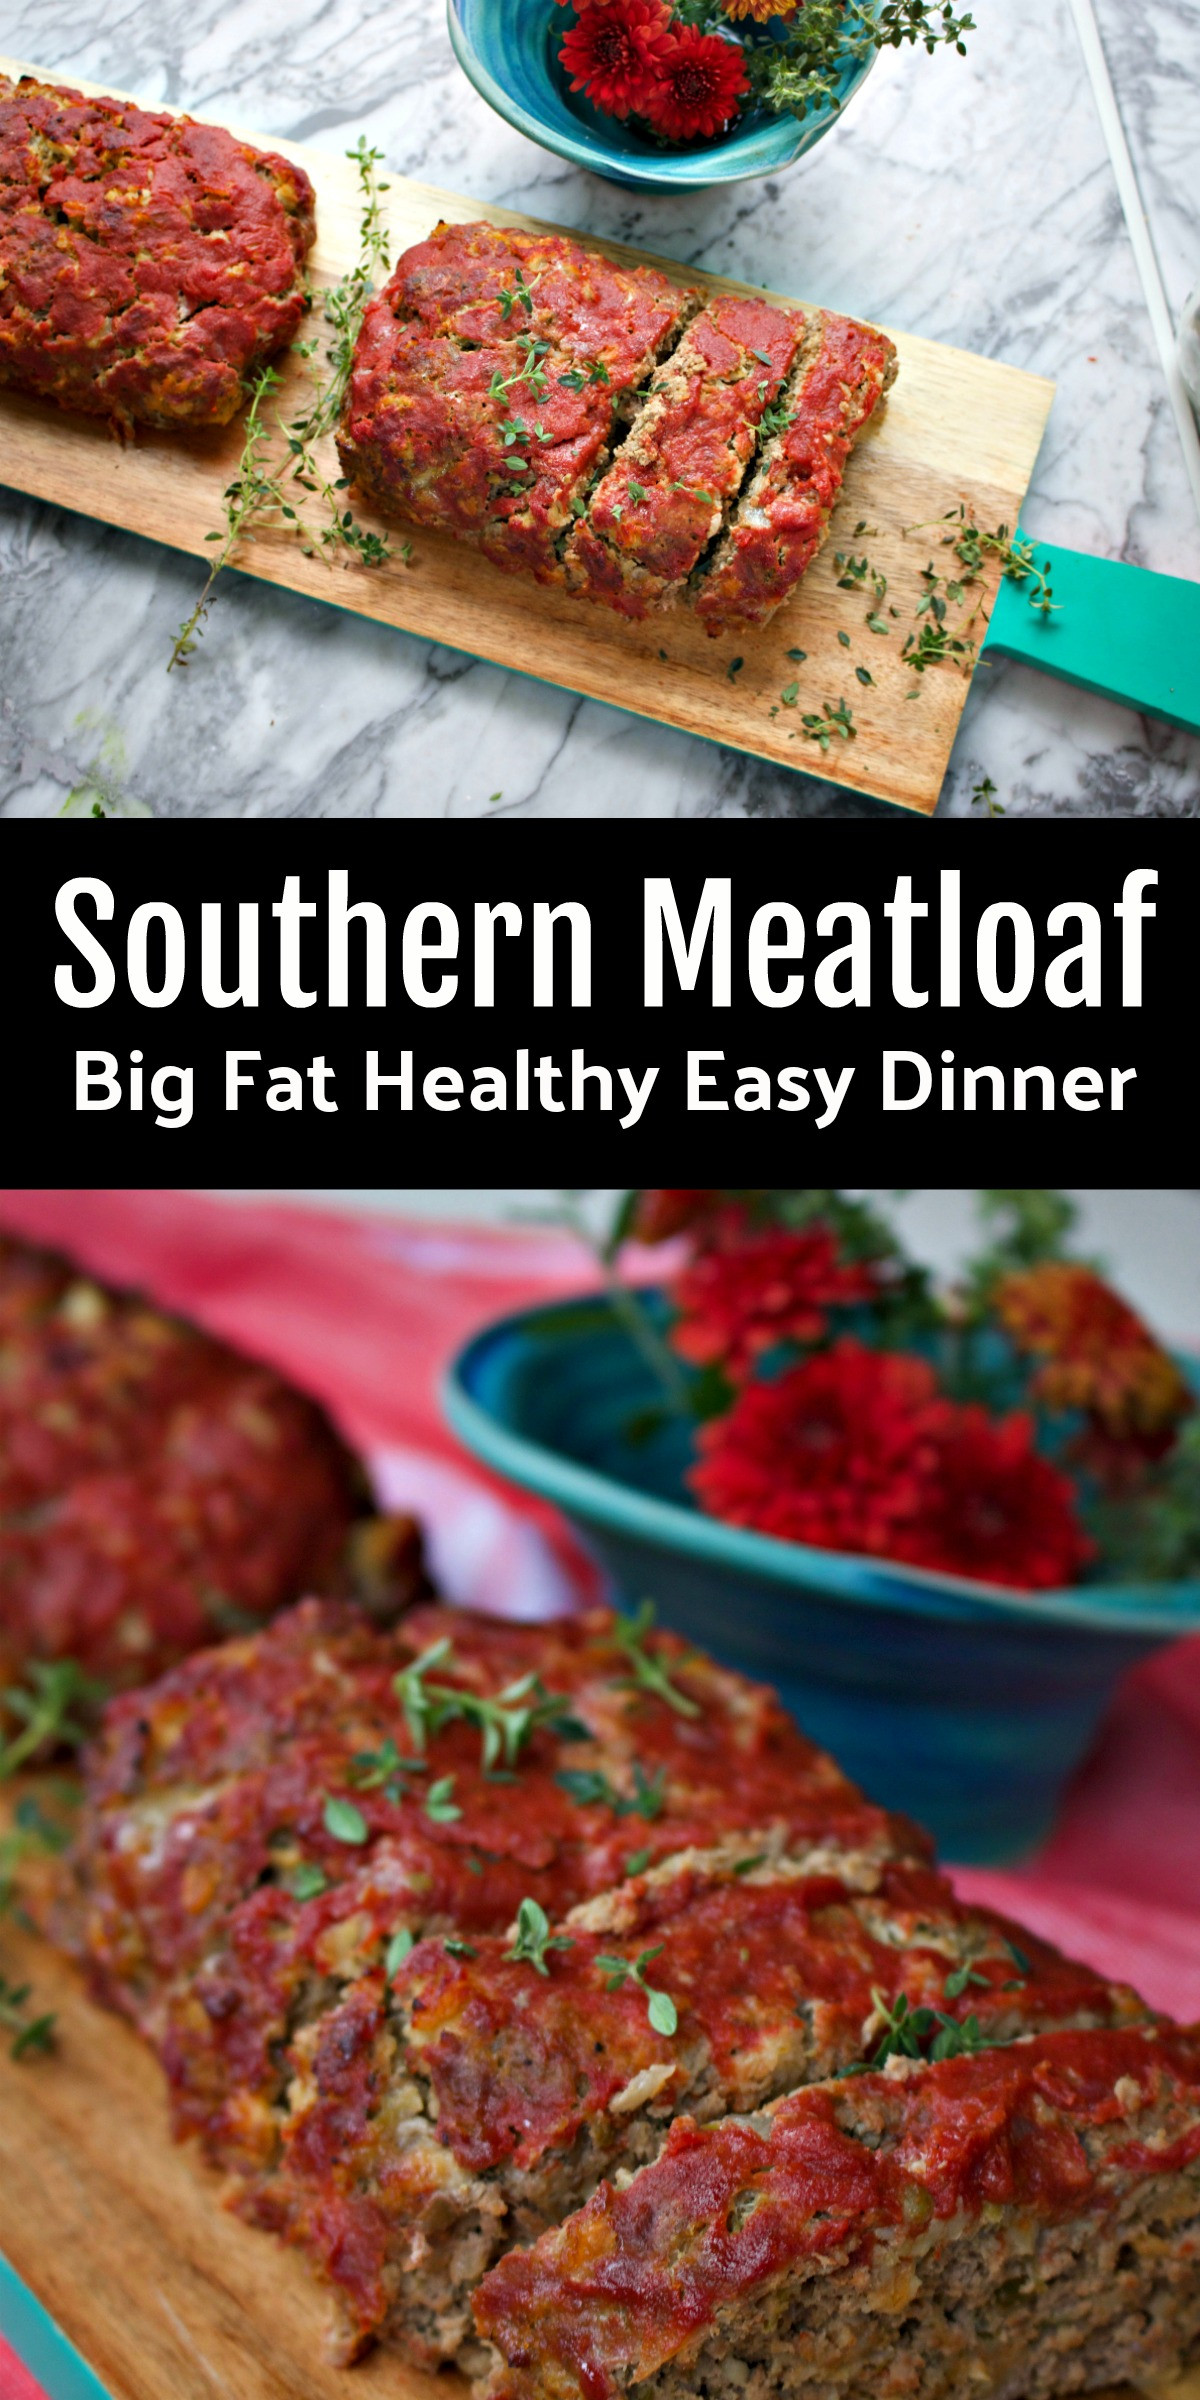 Easy Healthy Meatloaf Recipes
 Big Fat Healthy Southern Meatloaf Recipe Made with Oats